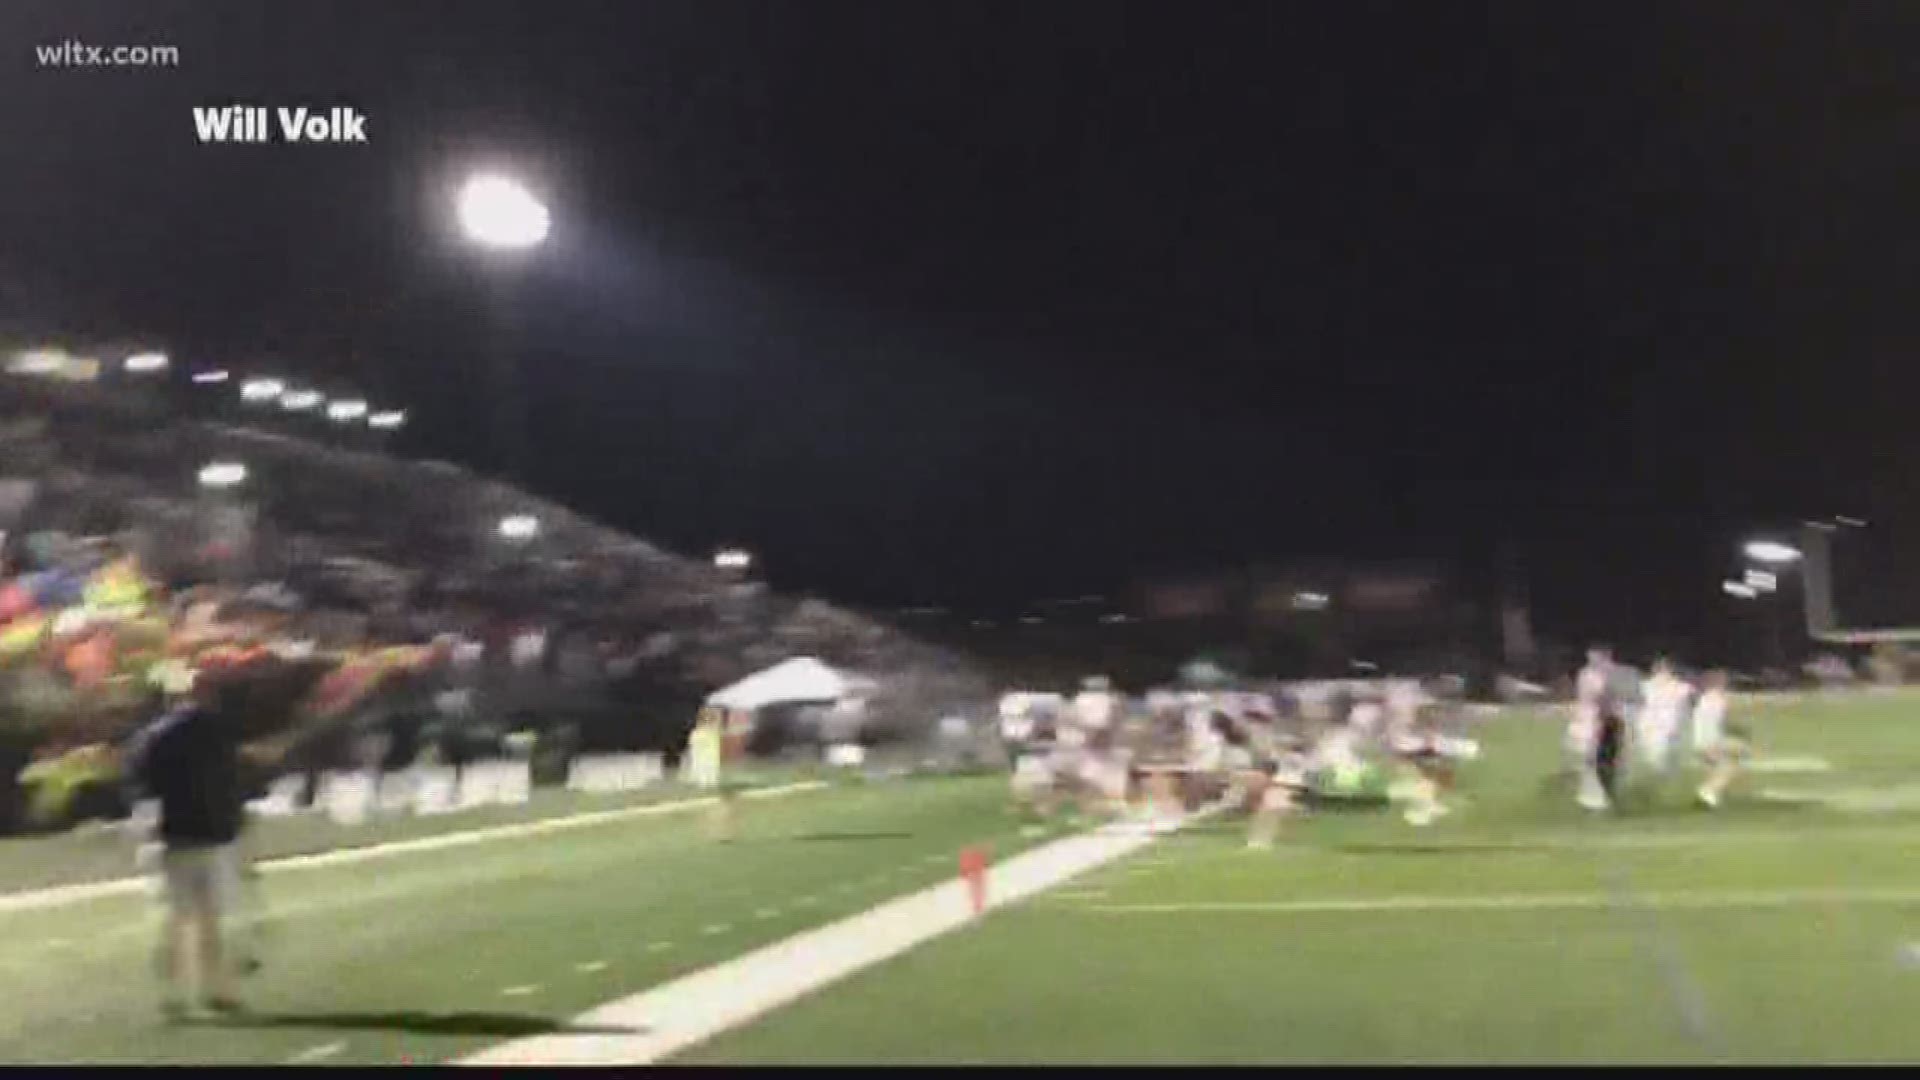 A panic at Dutch Fork stadium led to the suspension of the game.  